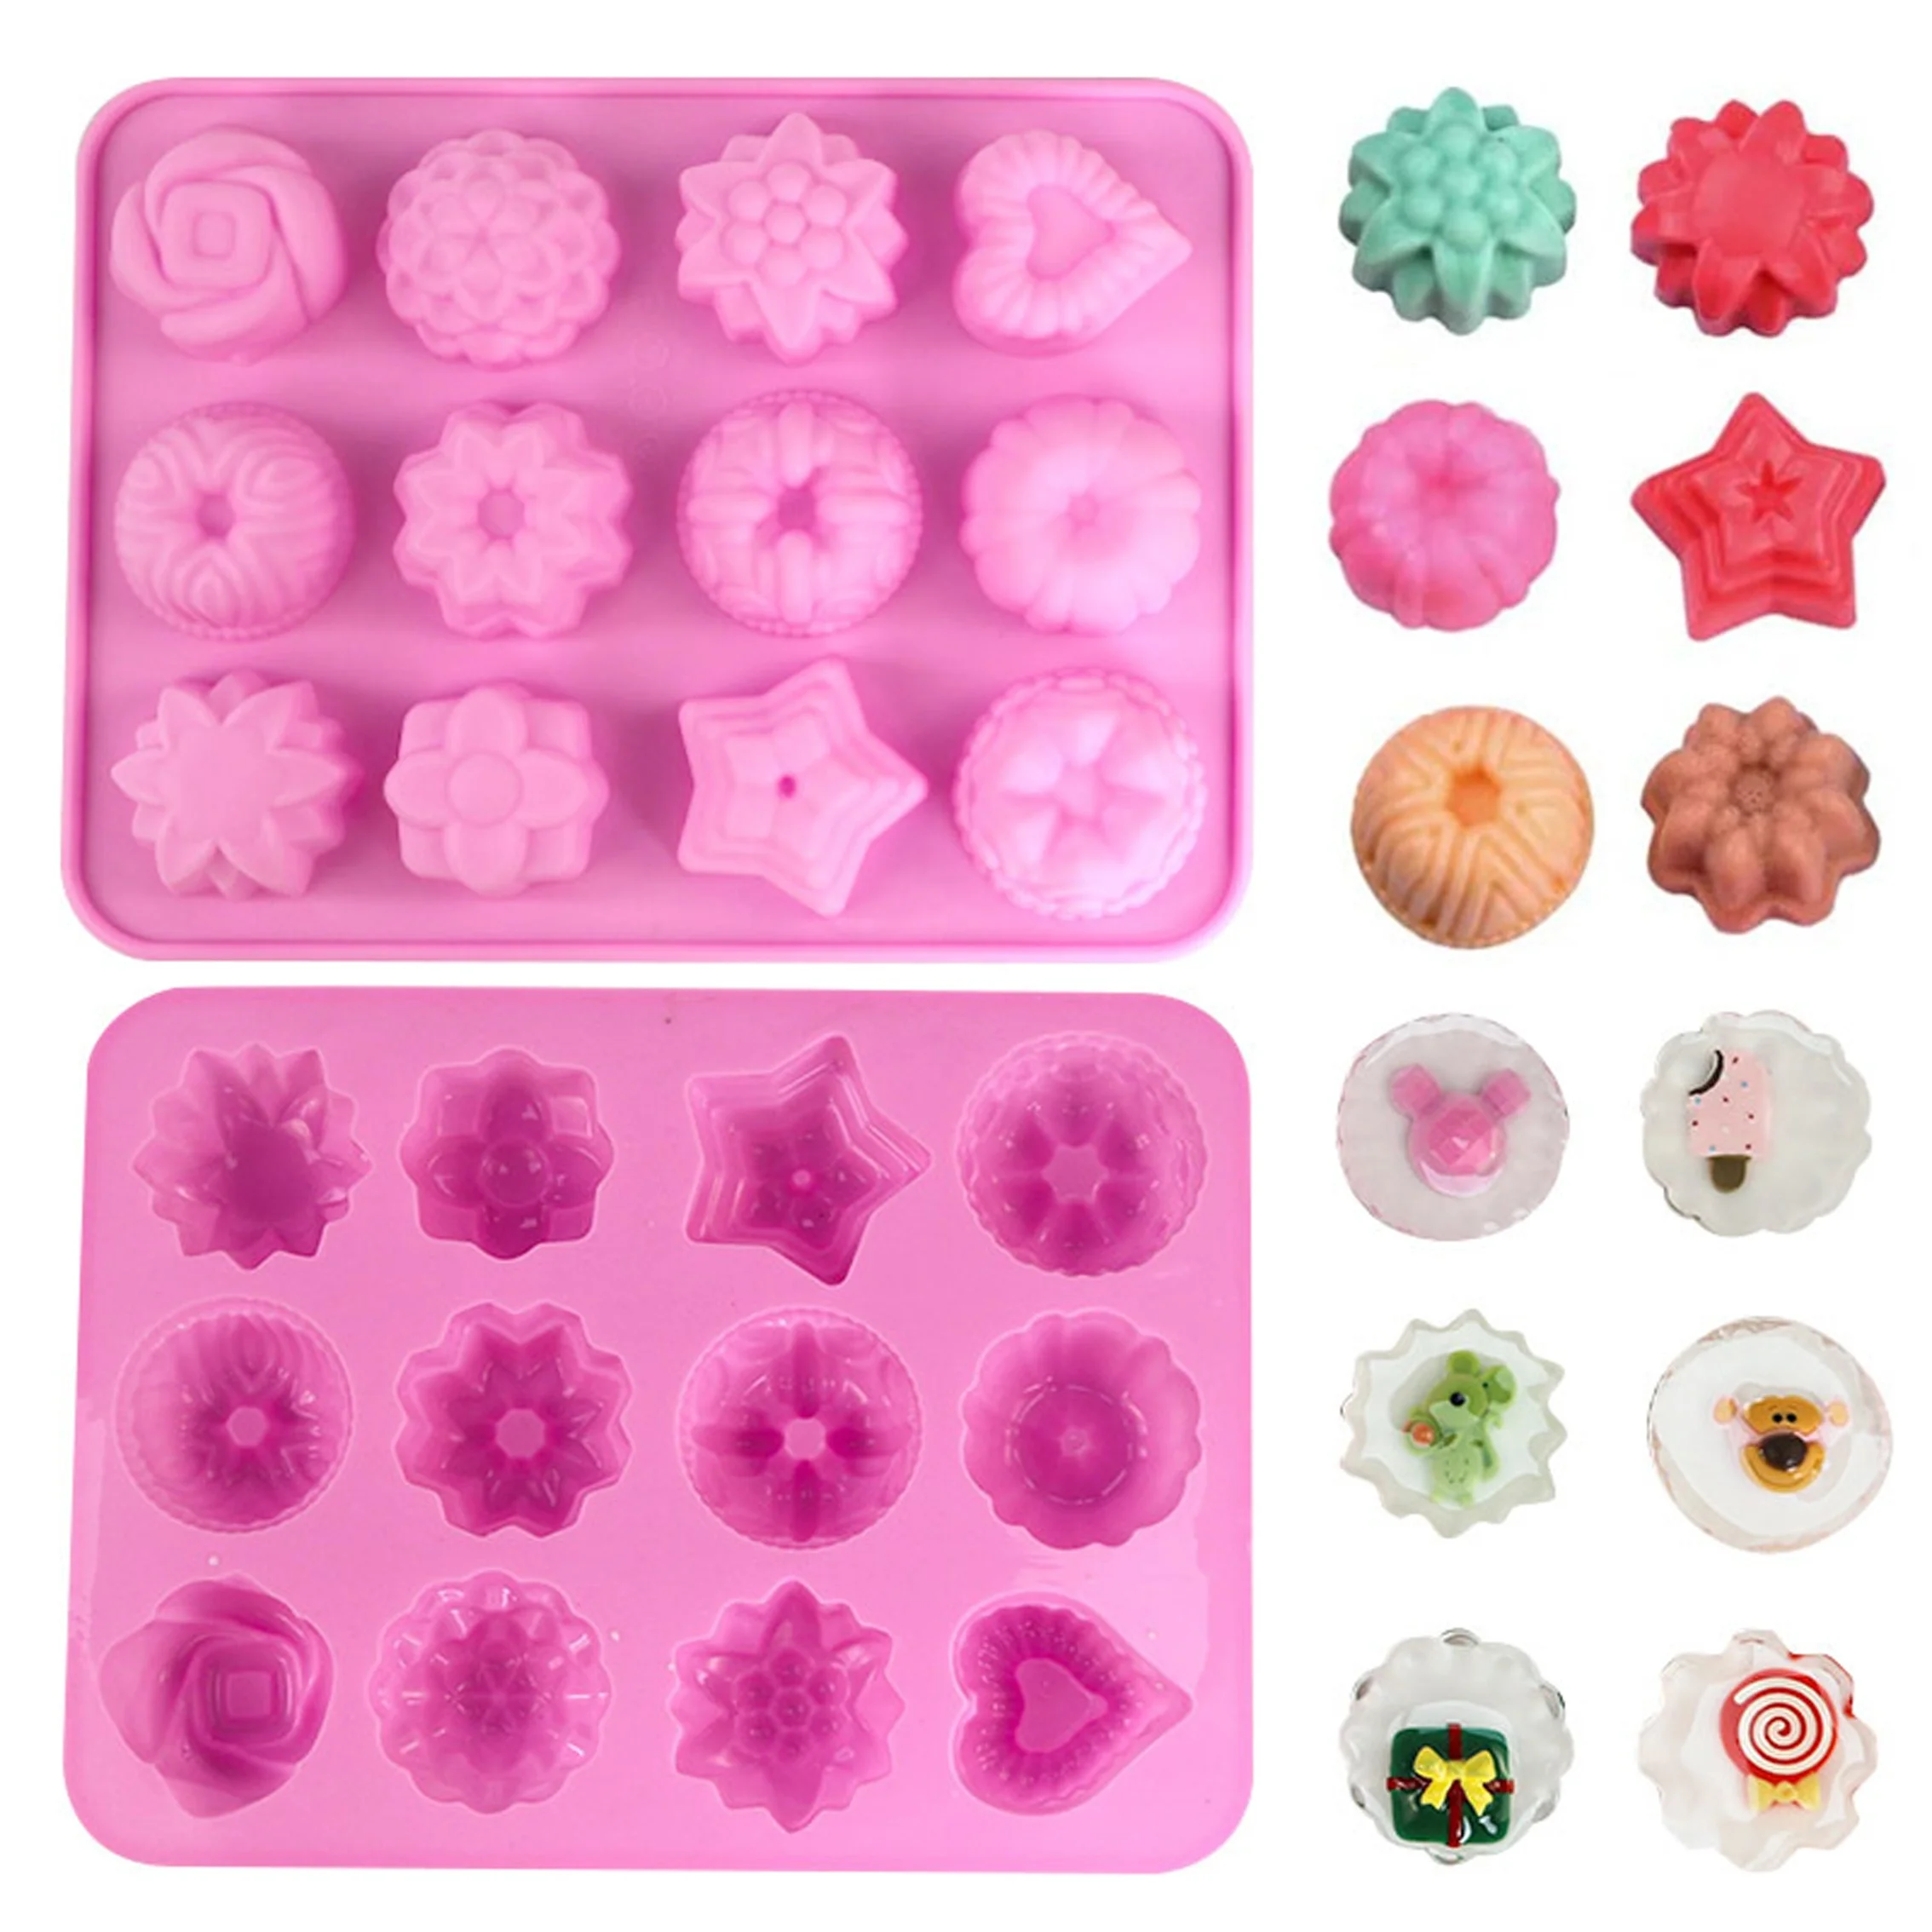 Hot Sale 12 Holes Flowers Silicone Cake Mold Chocolate Pudding Silicone Mold for Ice Cream Mold Baking Candle Tools